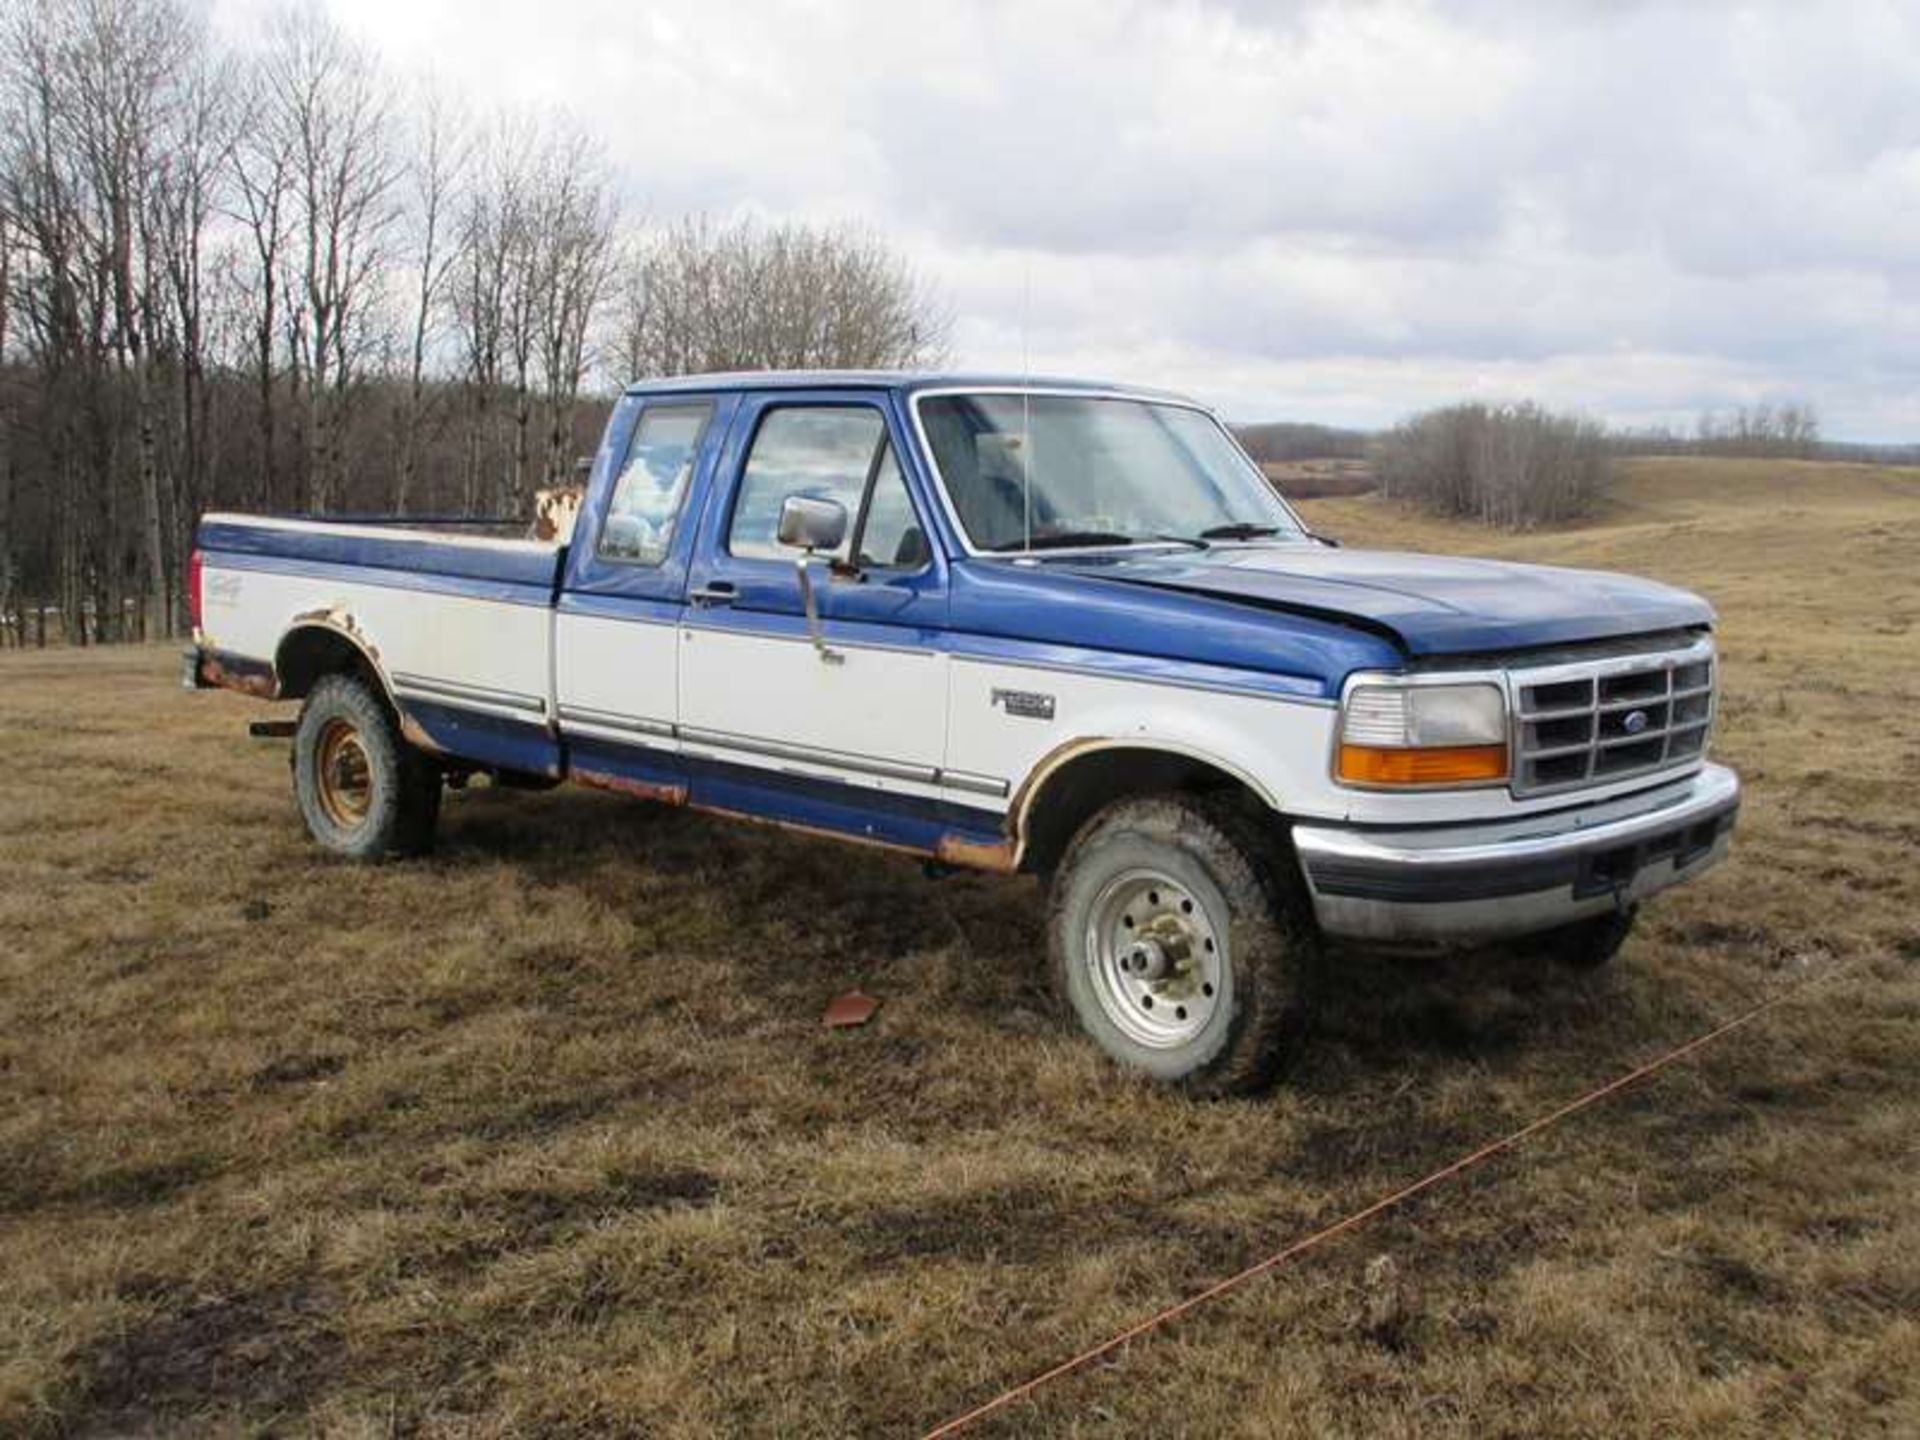 1997 Ford F250 4X4 Supercab Pickup (Parts Truck) - Image 2 of 4